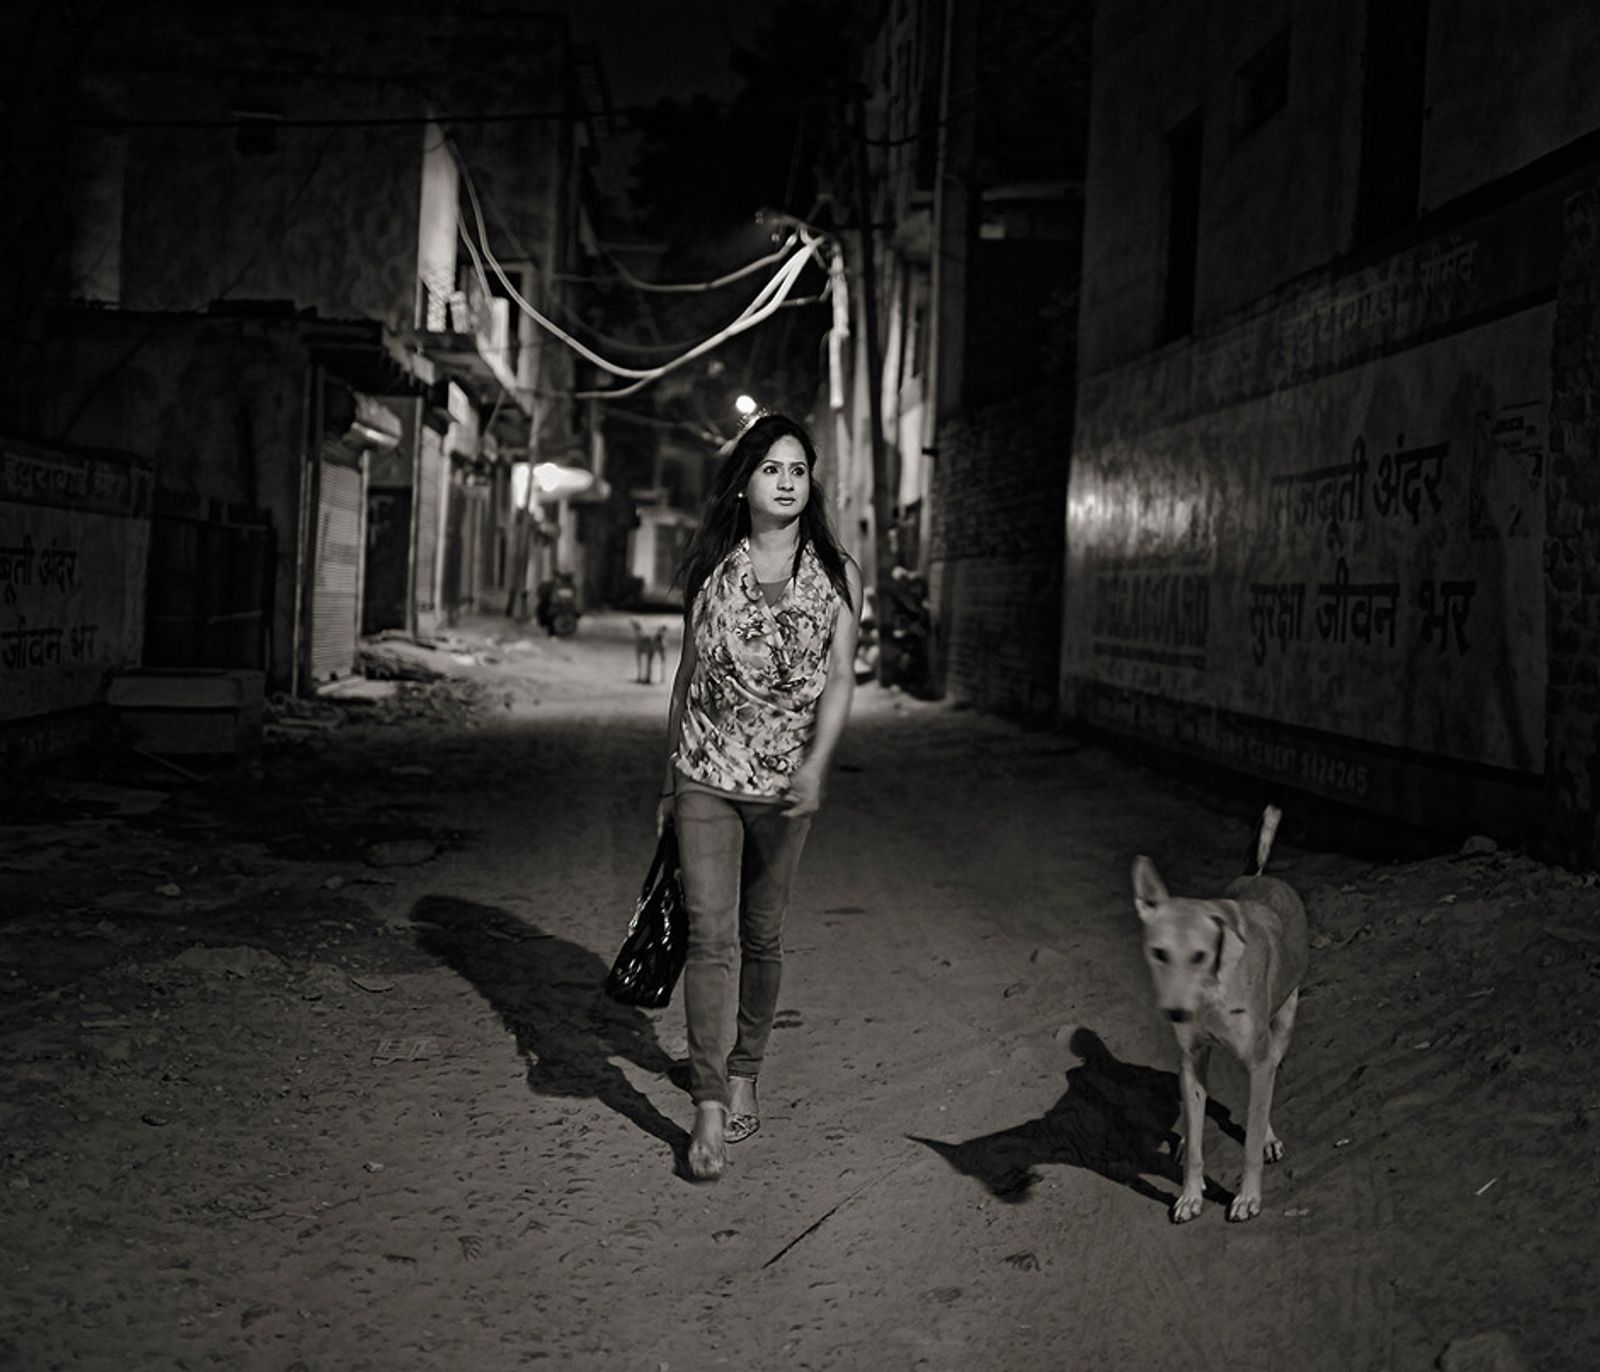 © Shahria Sharmin - Deepika's (29) journey has perhaps just begun, under the street lights of Delhi she guides no one but herself.